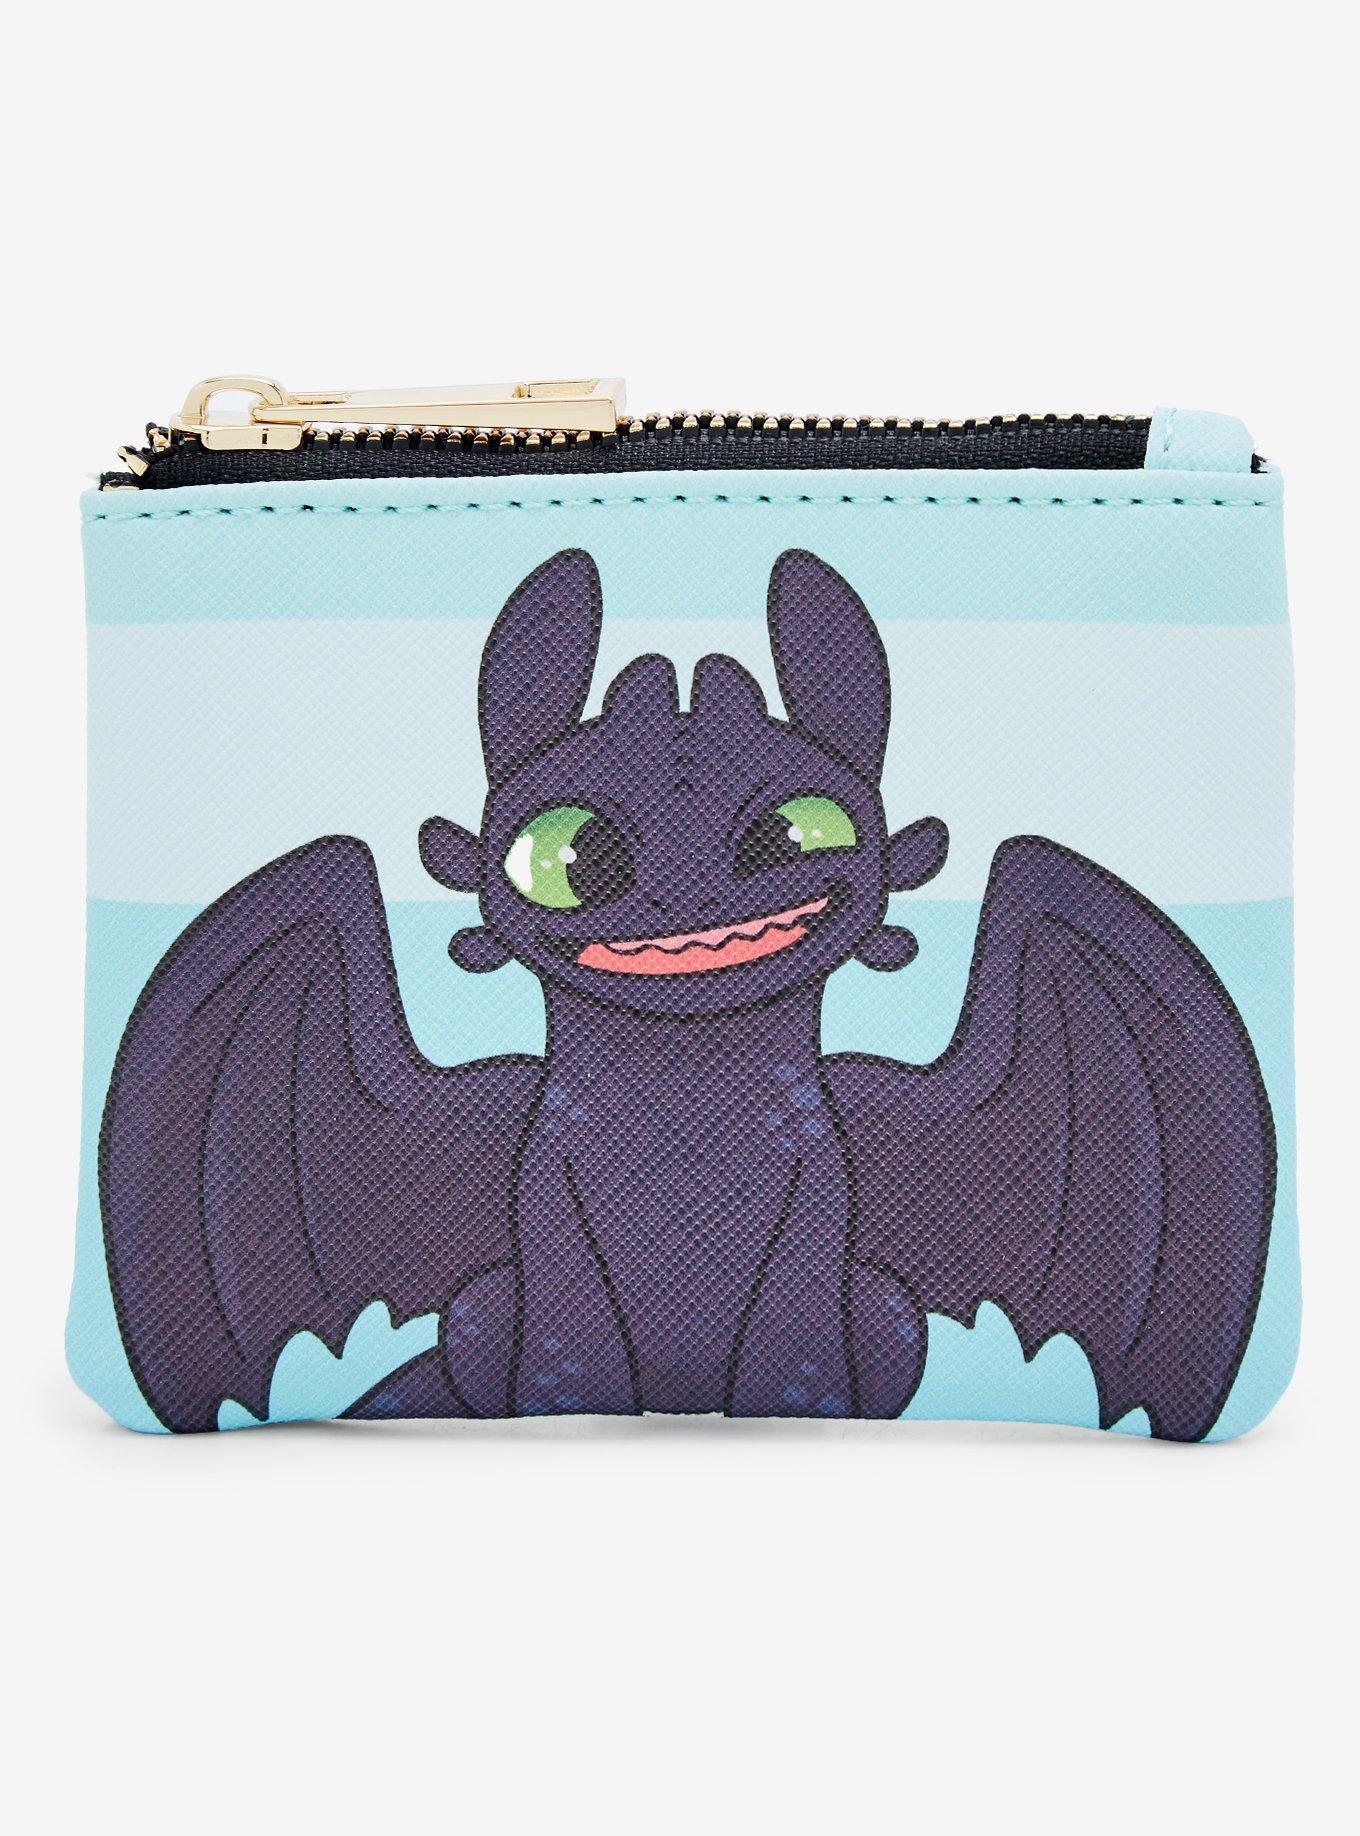 How to Train Your Dragon Toothless Smile Coin Purse - BoxLunch ...